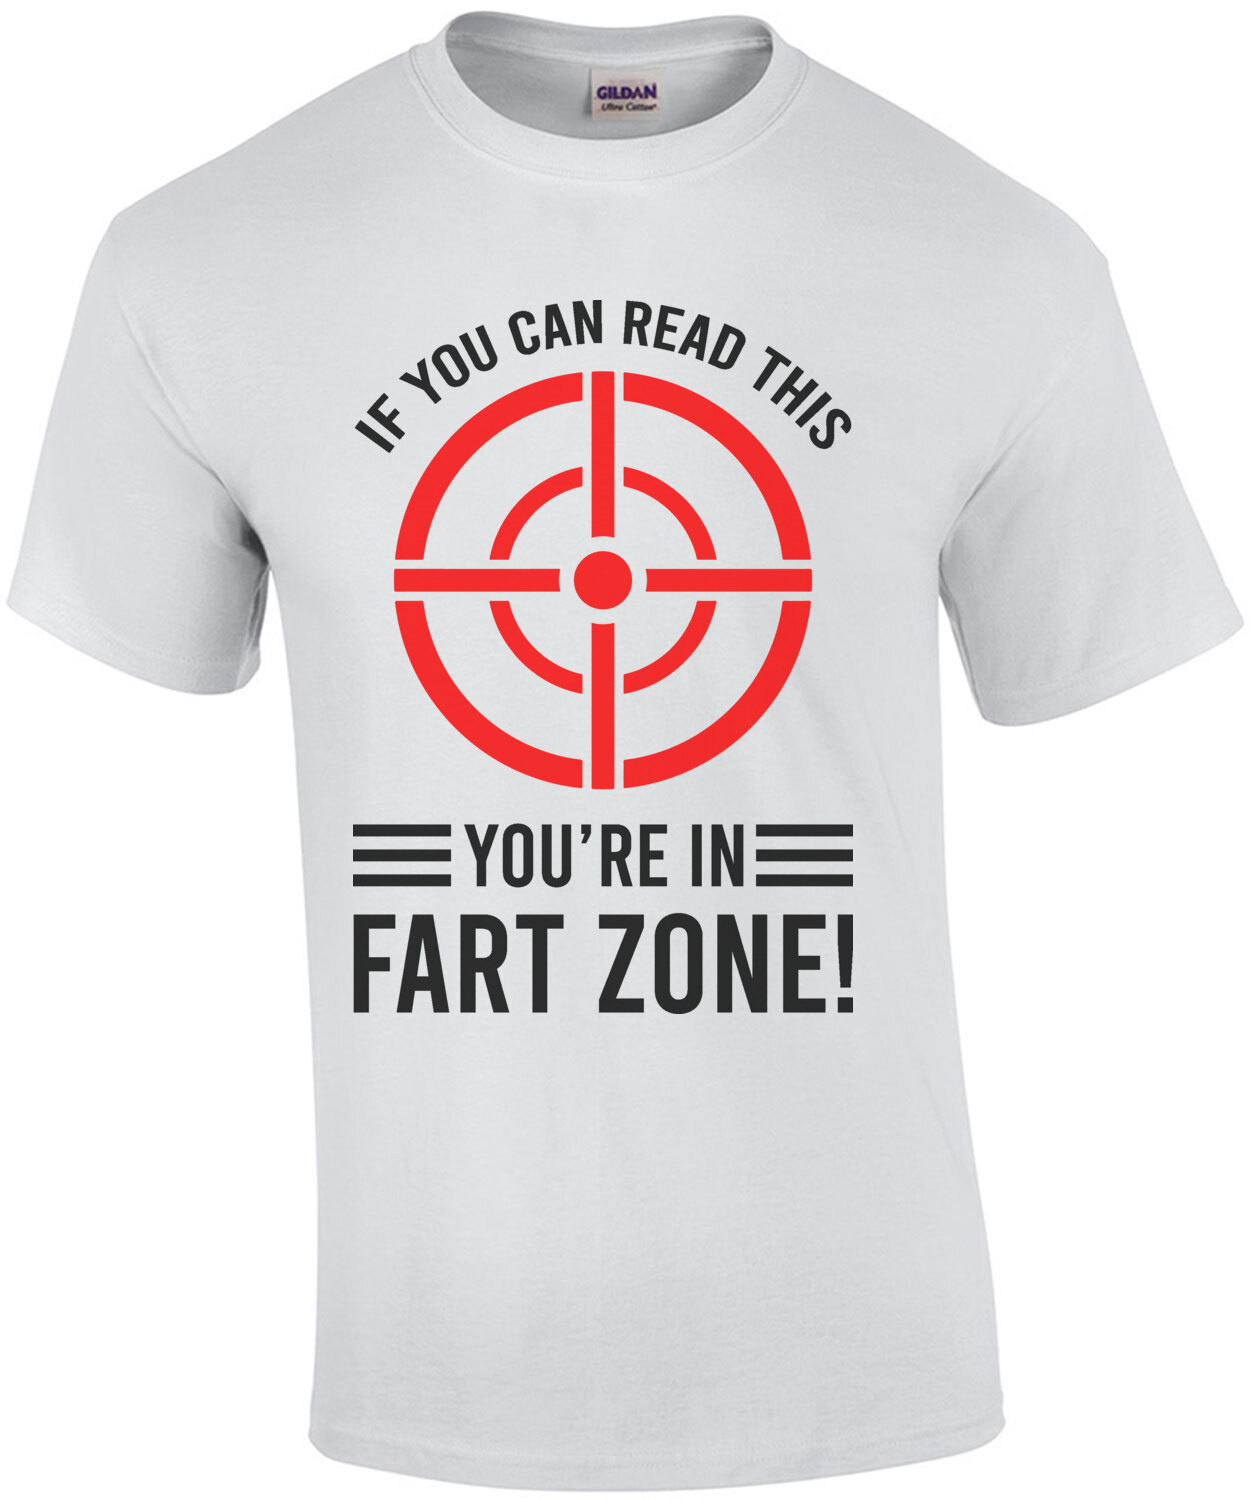 If you can read this - you're in fart zone! - funny t-shirt